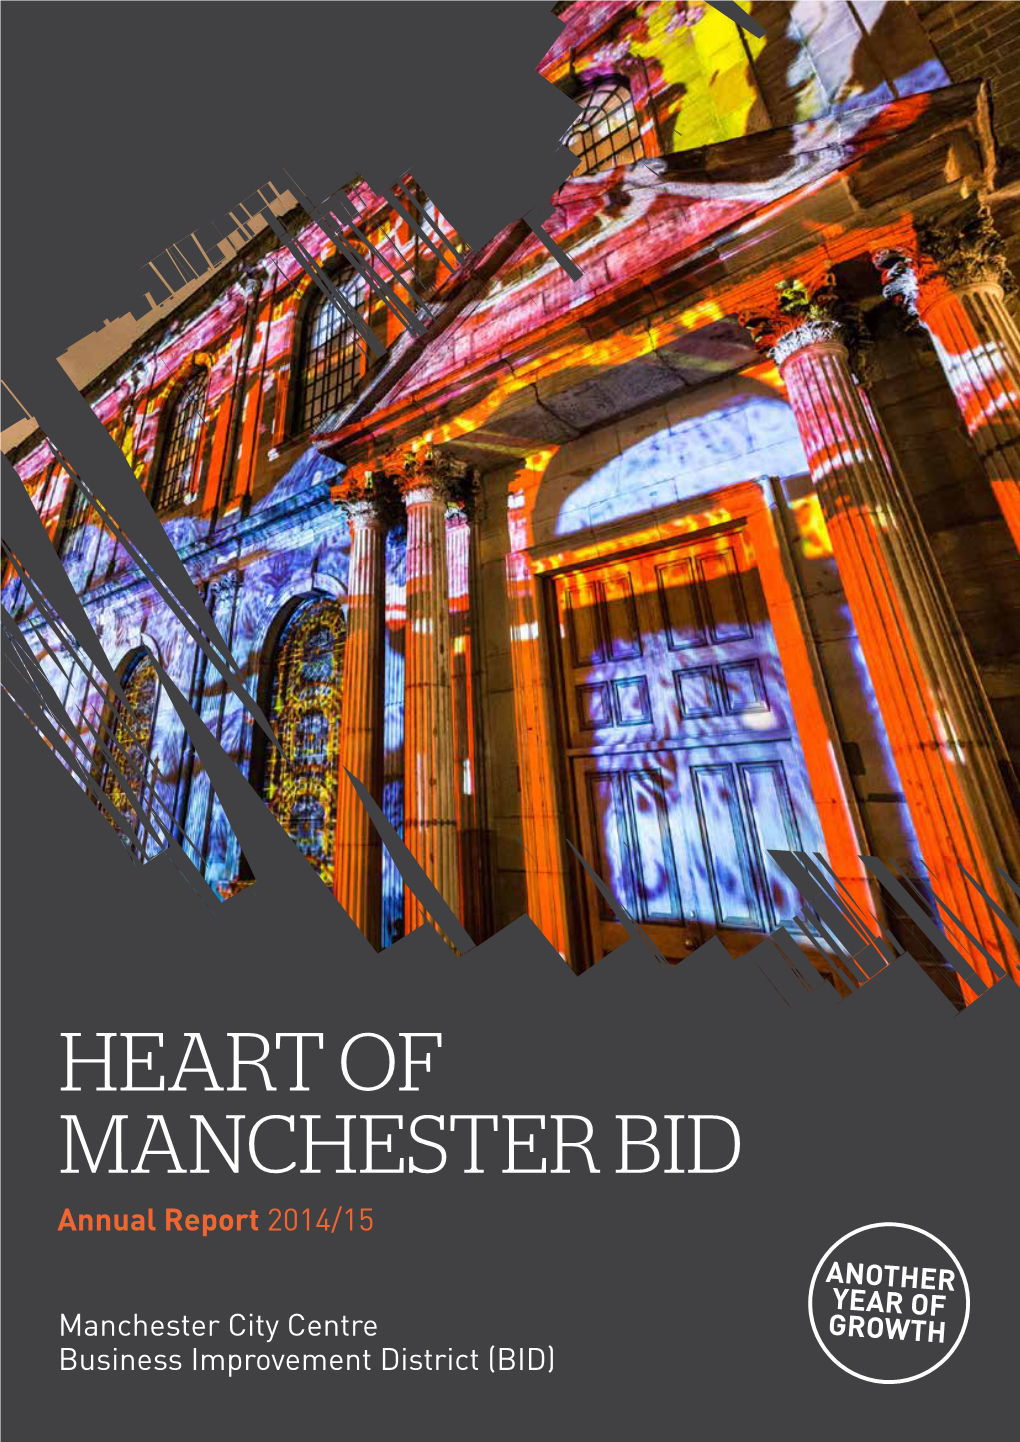 HEART of MANCHESTER BID Annual Report 2014/15 ANOTHER YEAR of Manchester City Centre GROWTH Business Improvement District (BID) ANOTHER YEAR of GROWTH